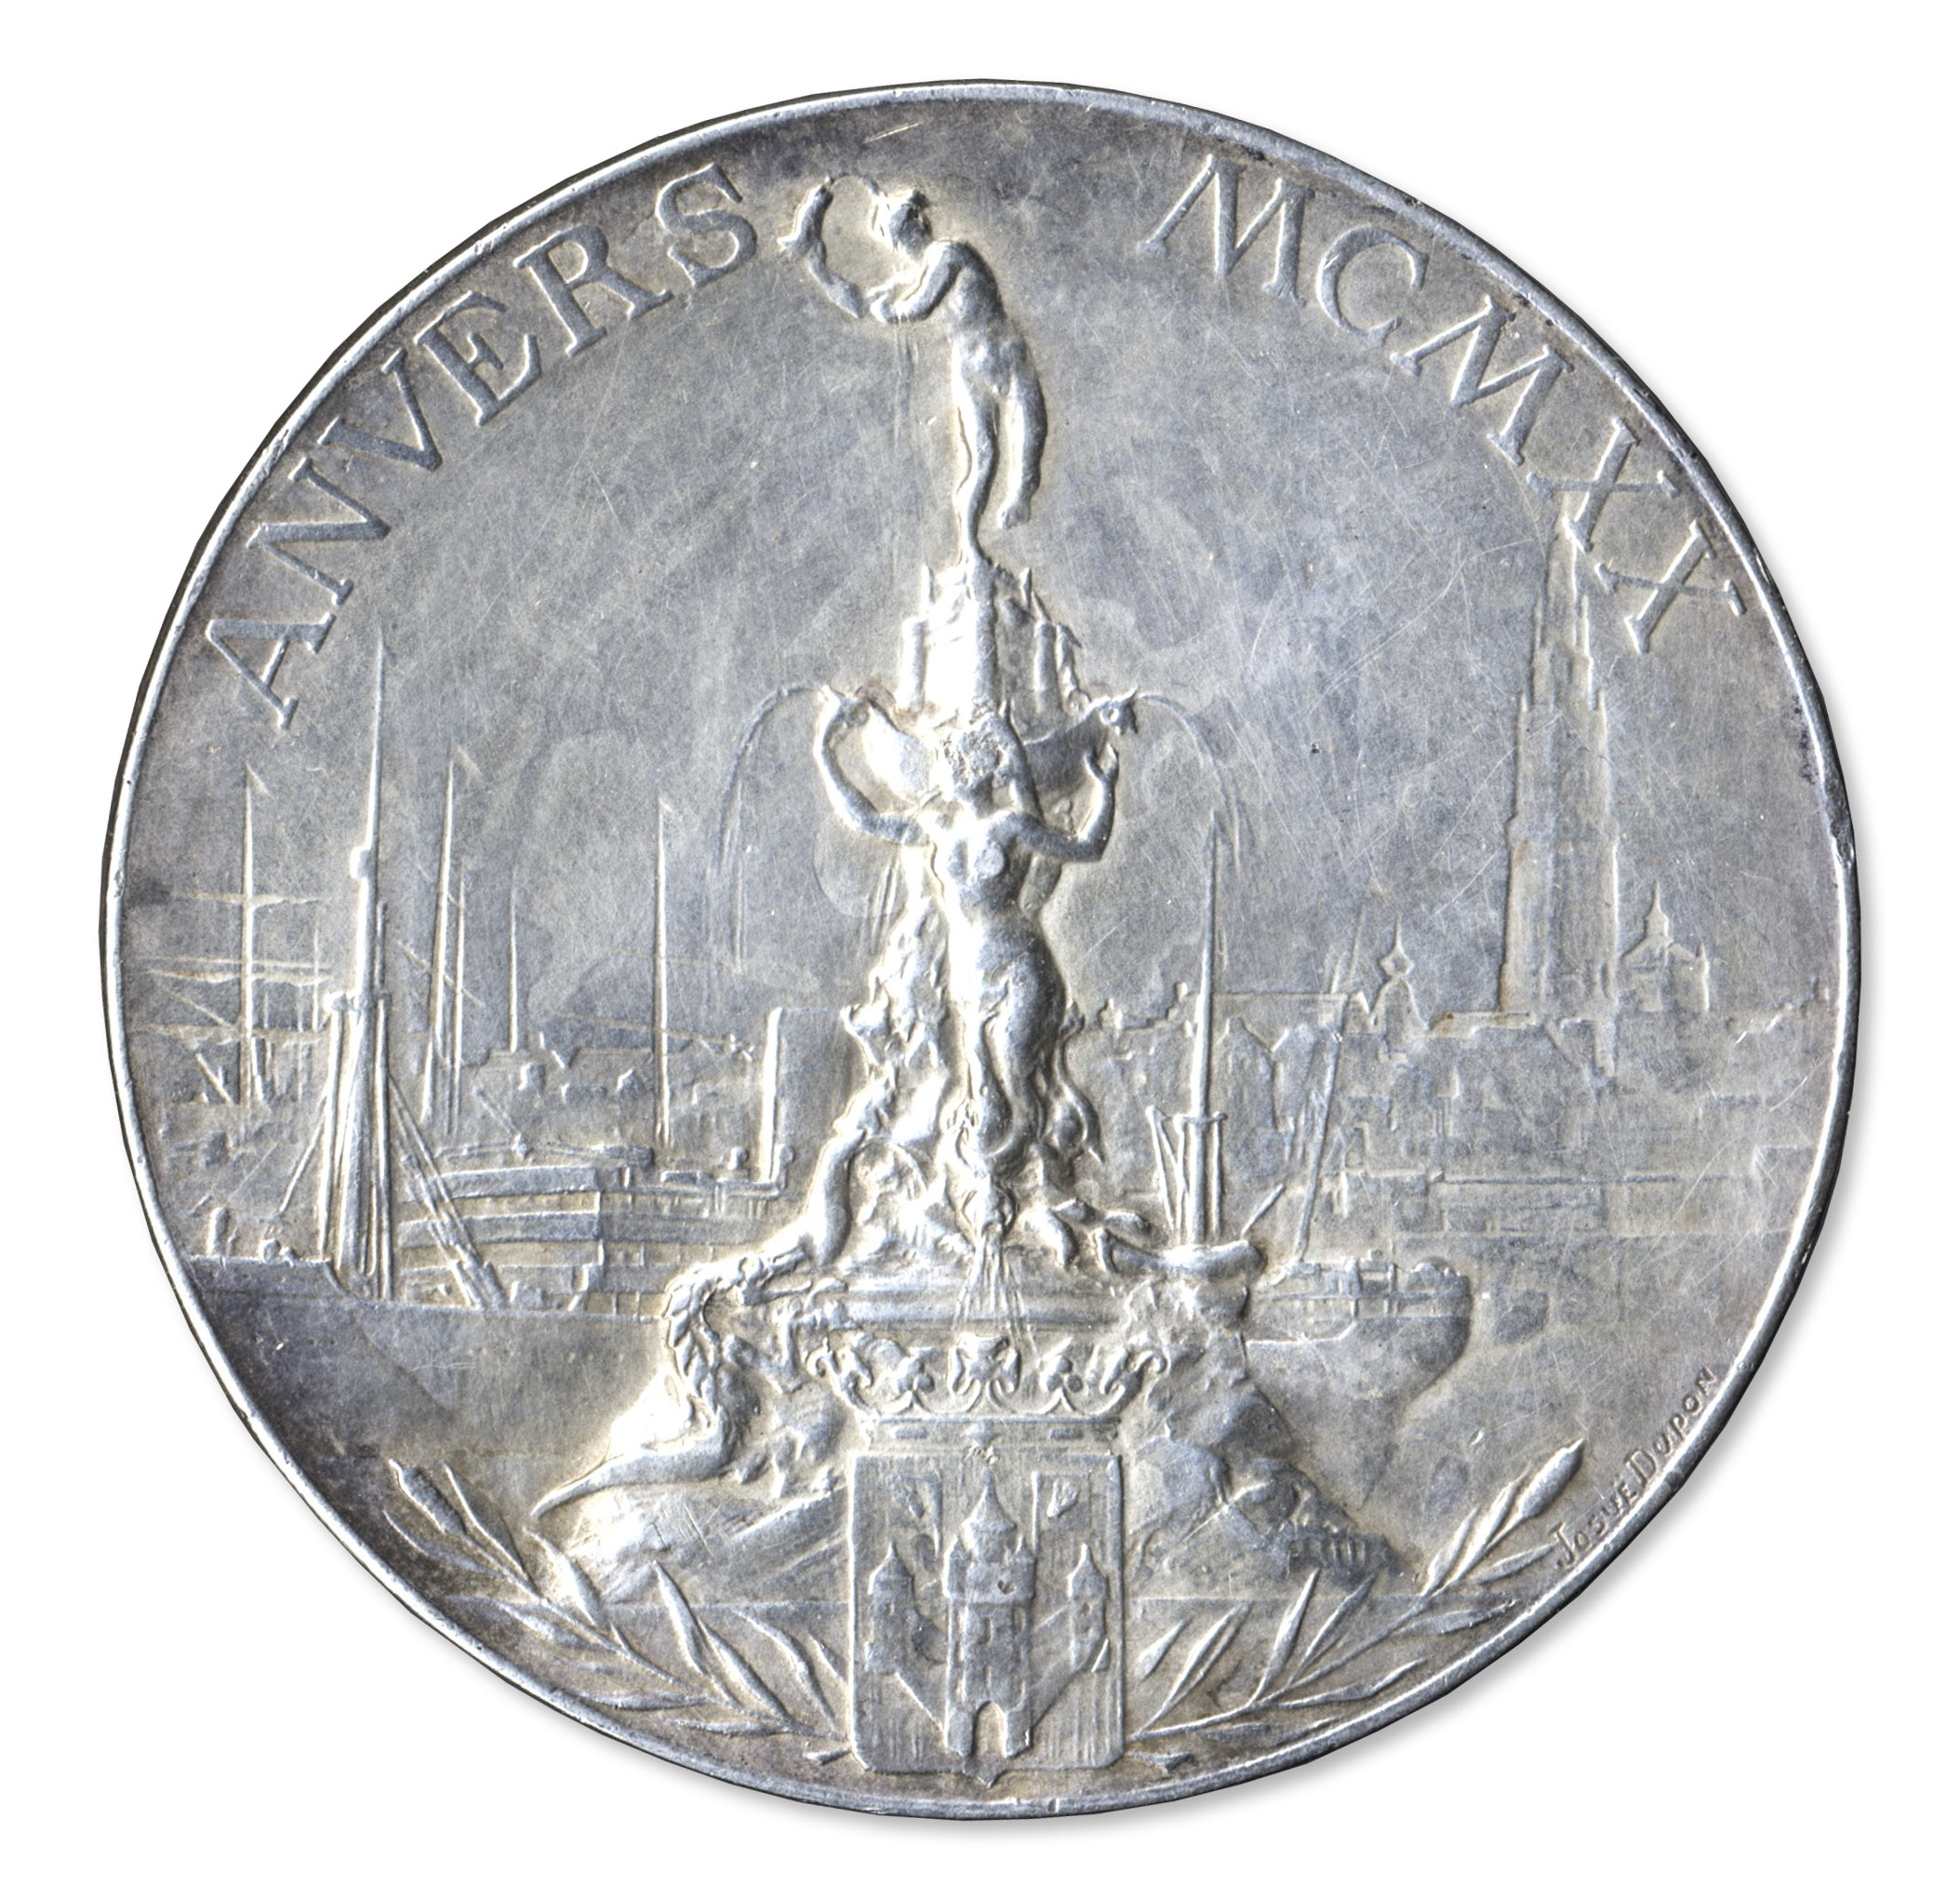 Olympics Memorabilia Silver Olympic Medal From the 1920 Summer Olympics, Held in Antwerp, Belgium - Image 4 of 4